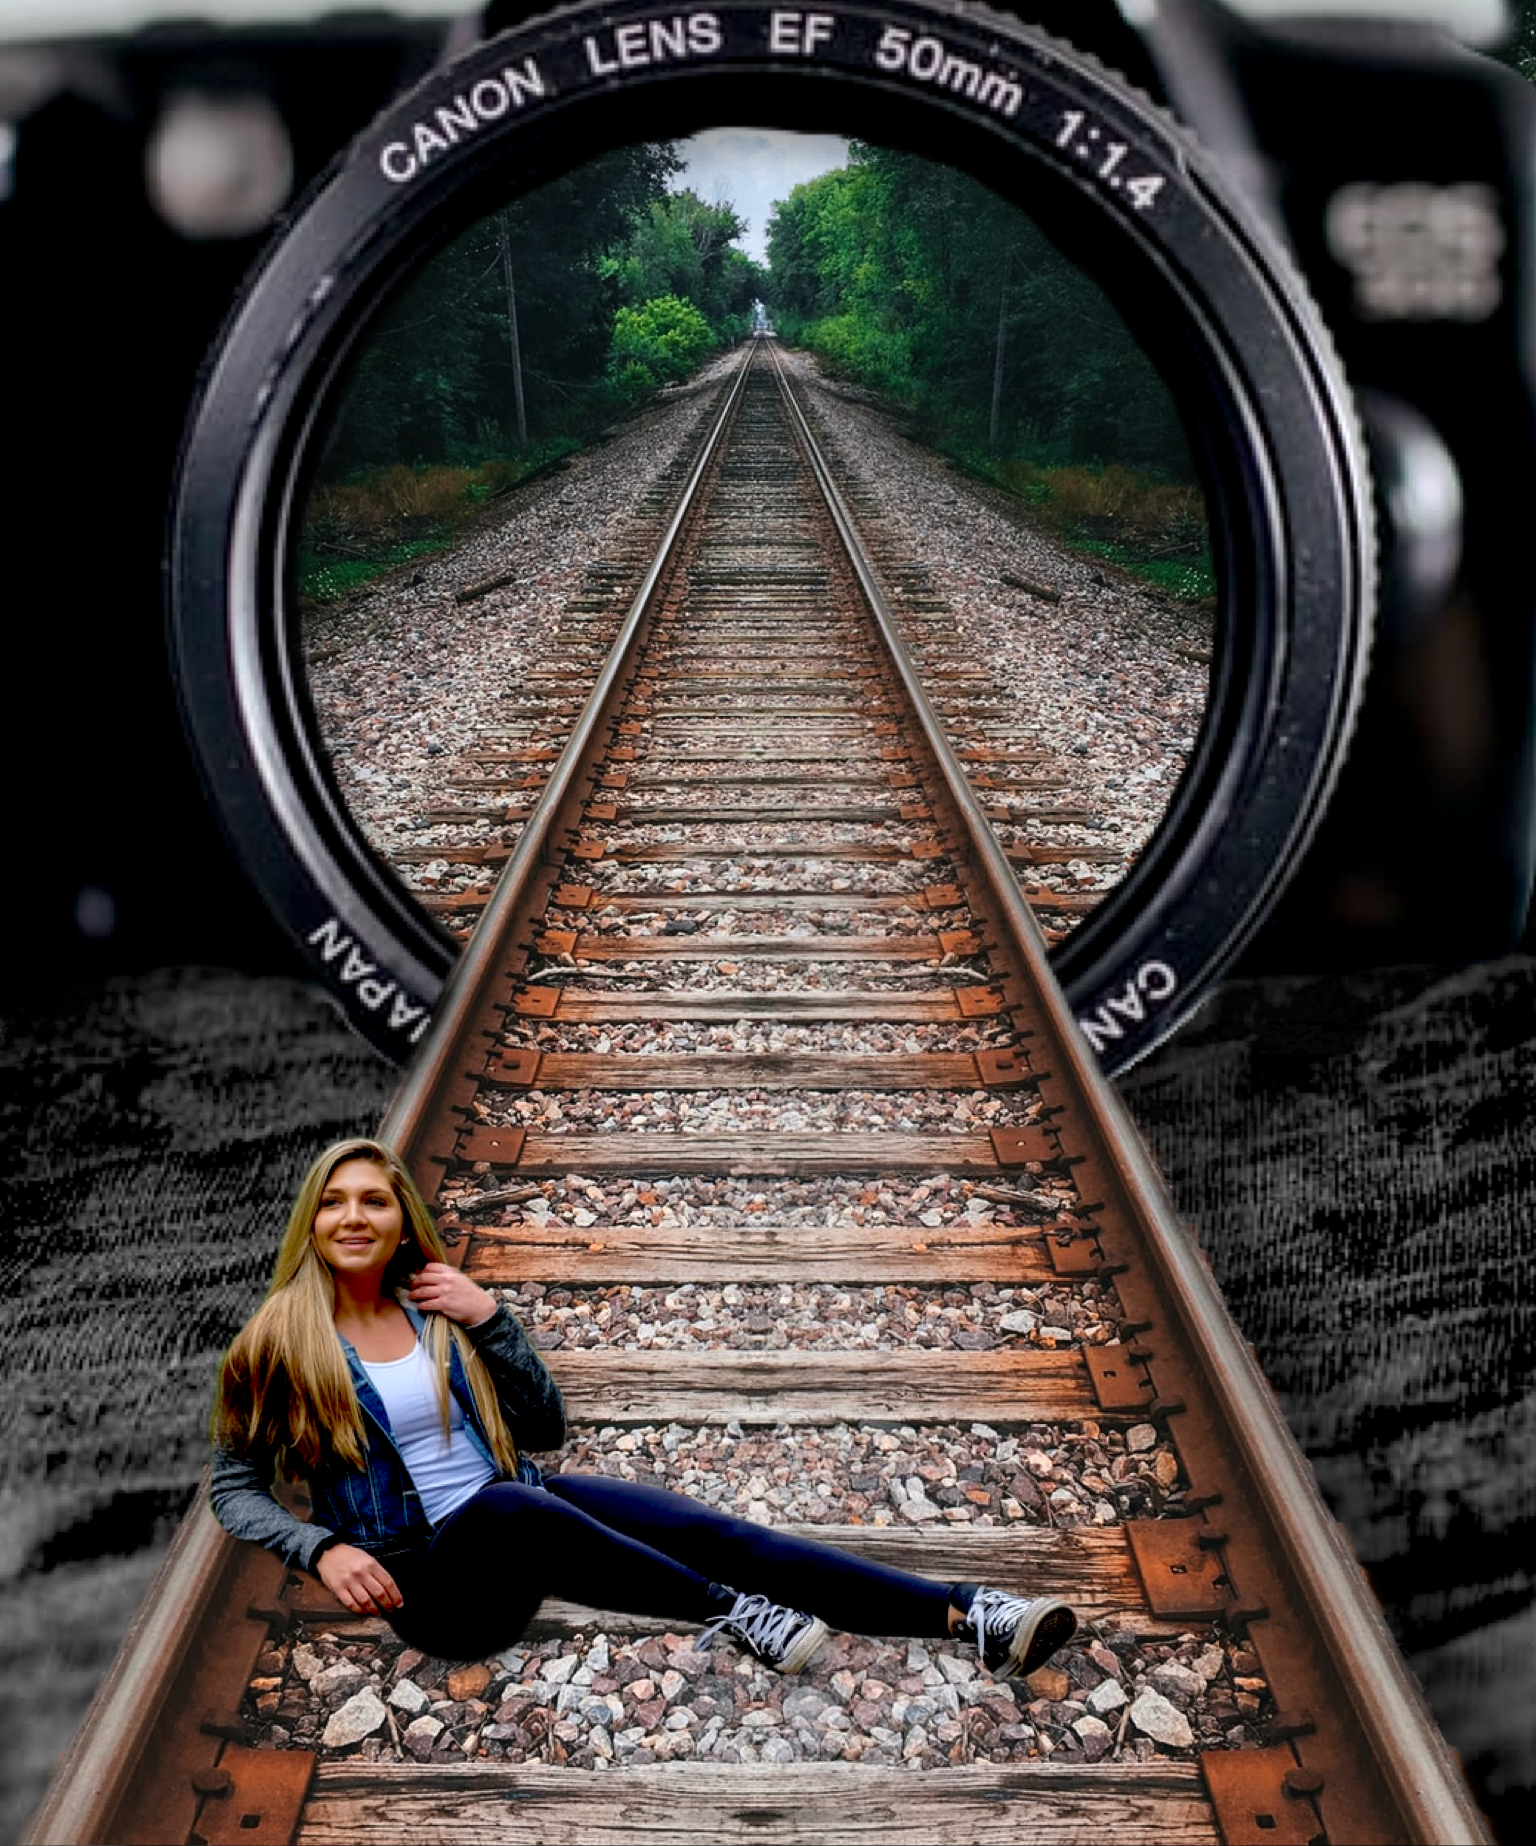 Woman railway and camera lens collage art template